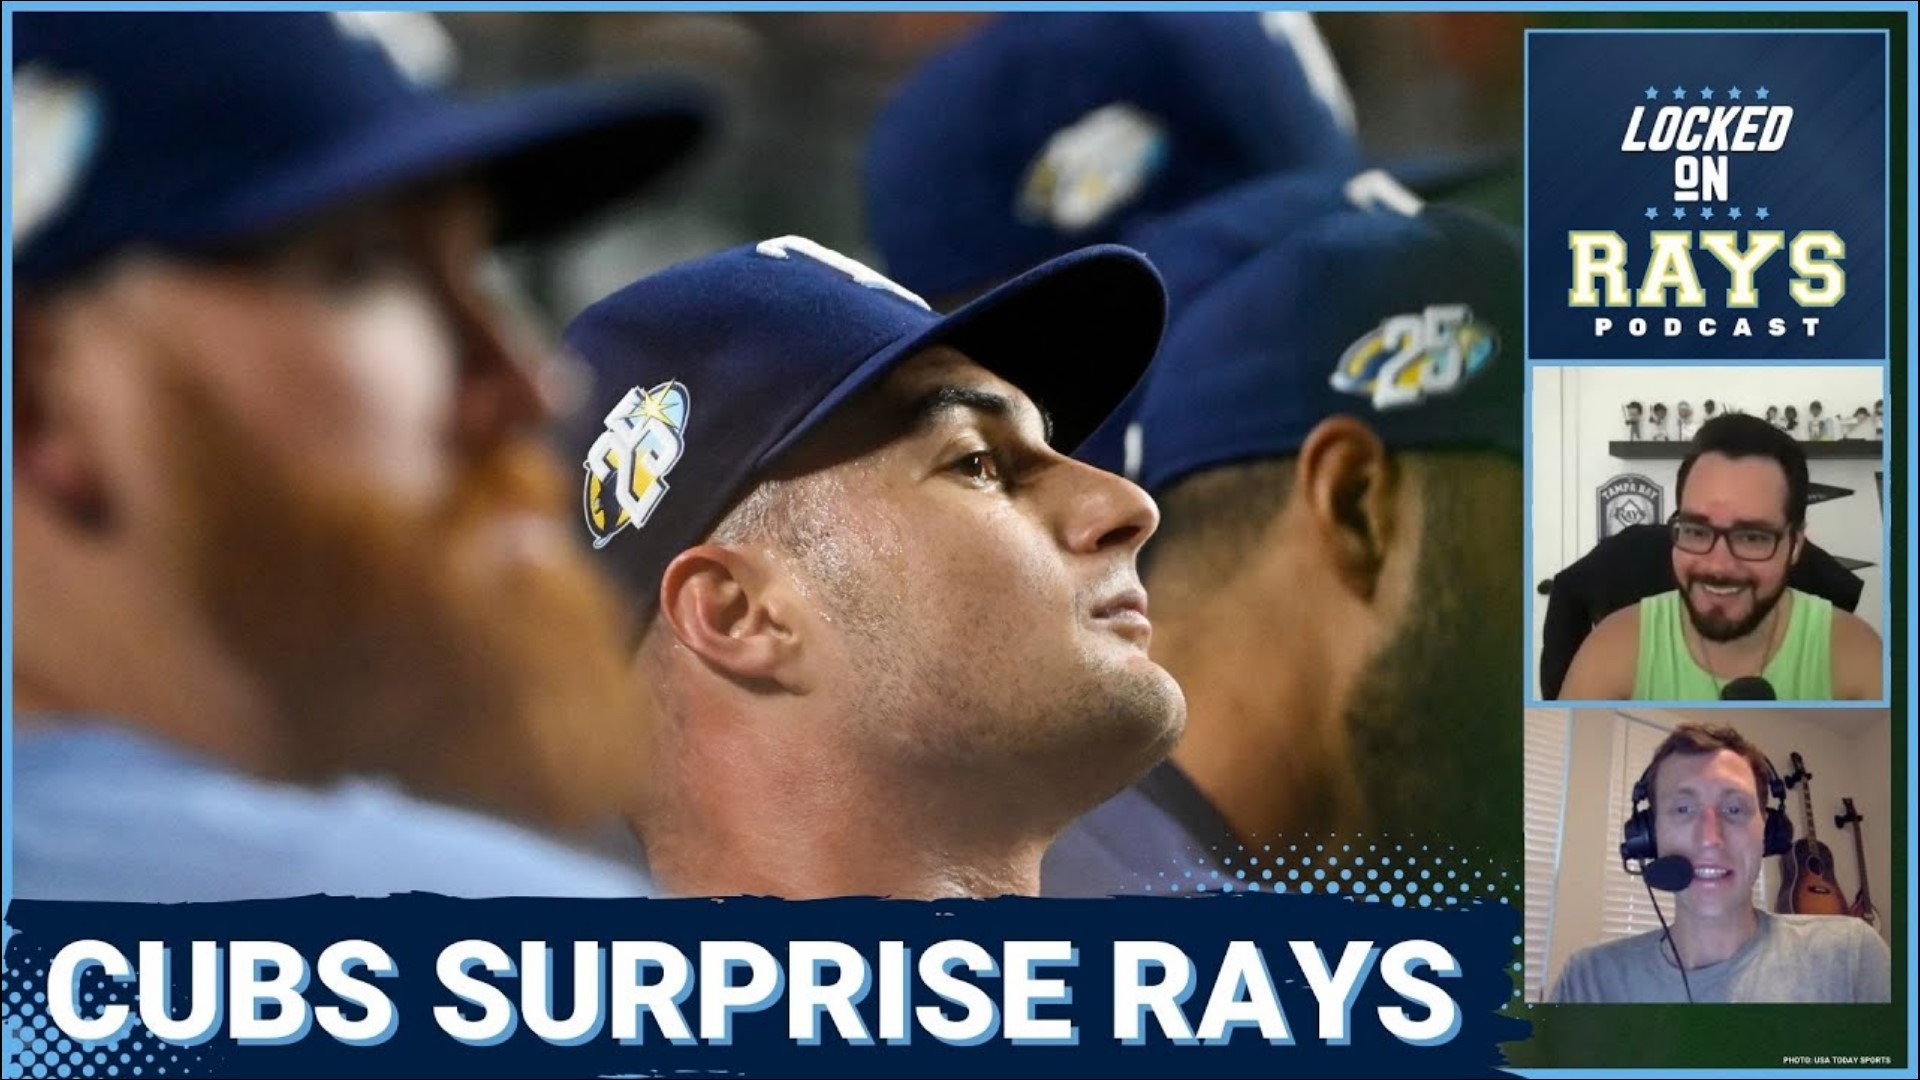 The Tampa Bay Rays have lost the series against the Chicago Cubs by scoring only 1 run in the first two games of the series.